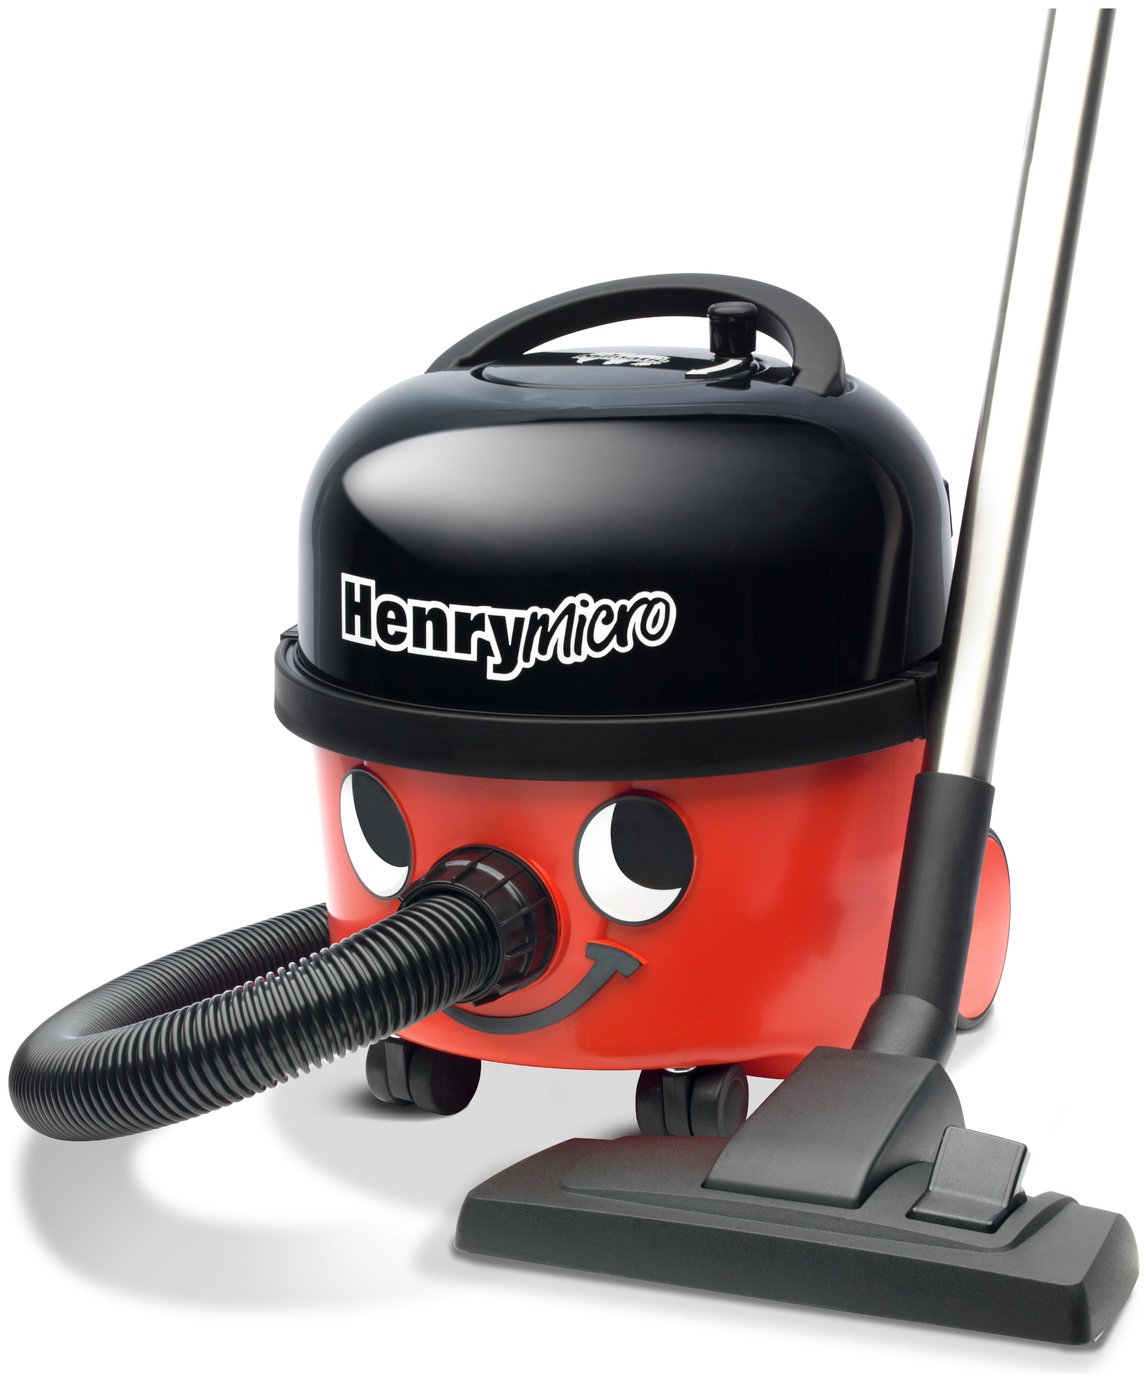 Henry HVR 200M-11 Micro Bagged Cylinder Vacuum Cleaner